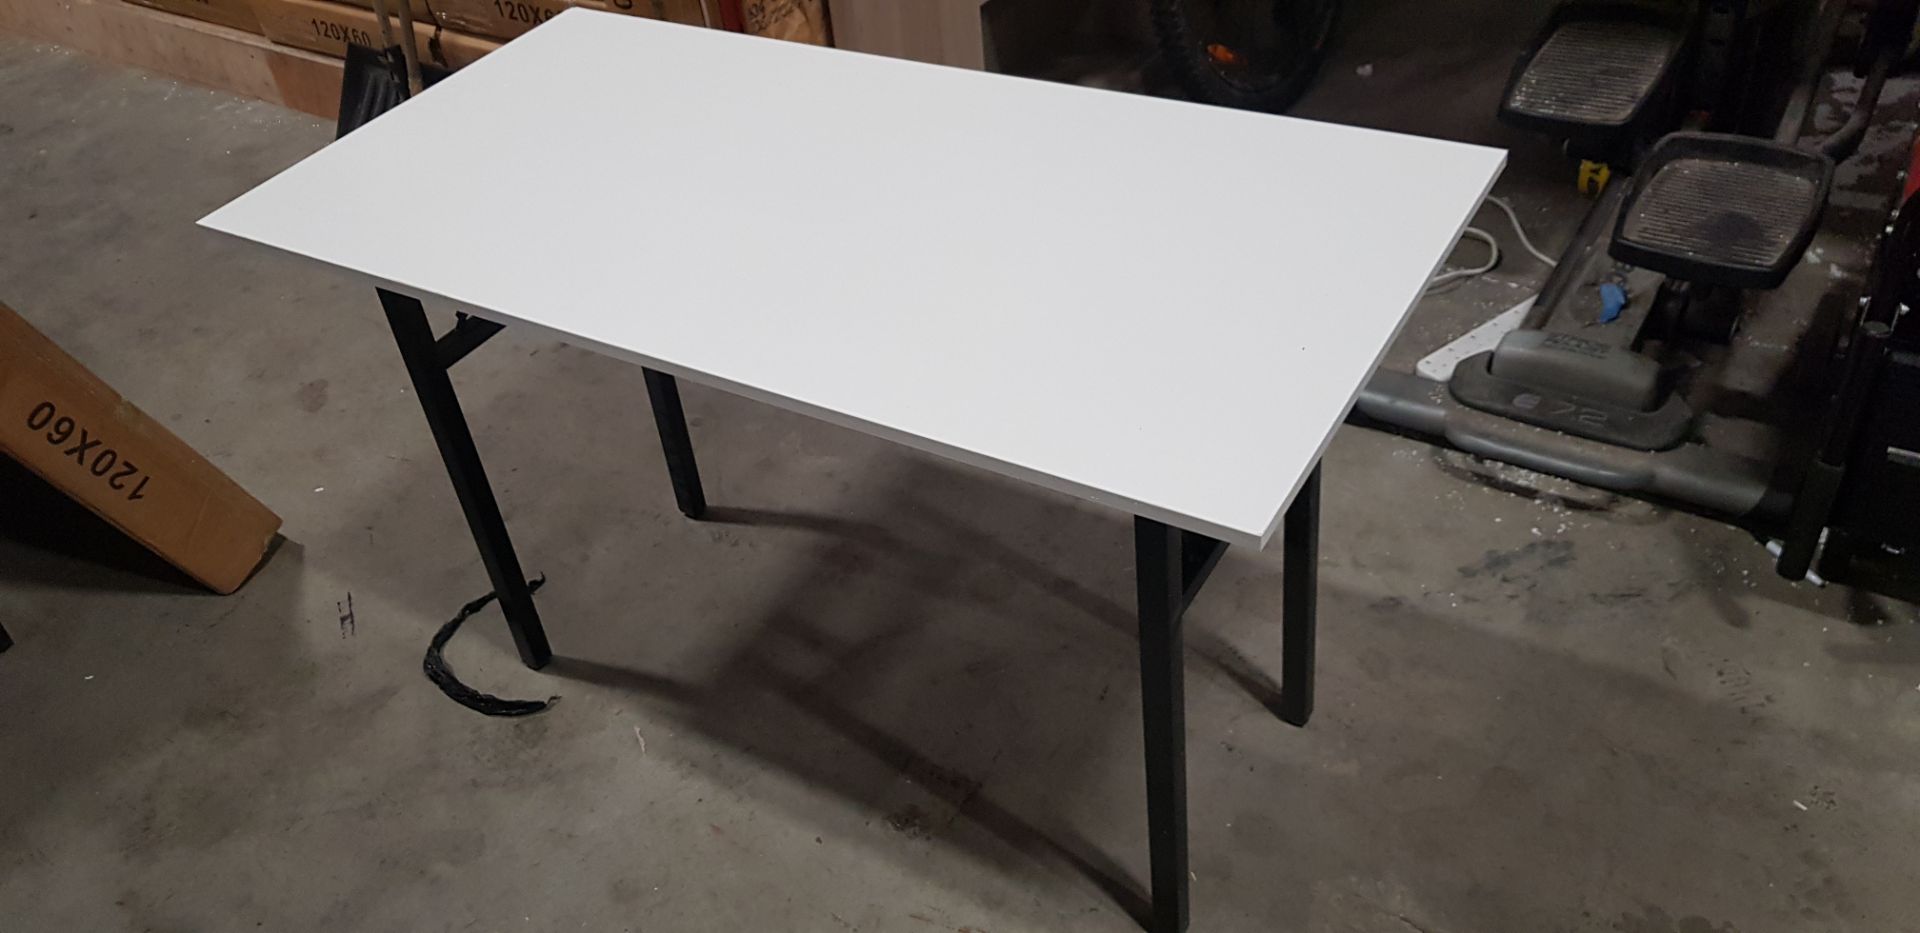 4 X BOXED WHITE FOLDABLE RECTANGULAR TABLES 60CM X 120CM (SOME MINOR SCUFFING)